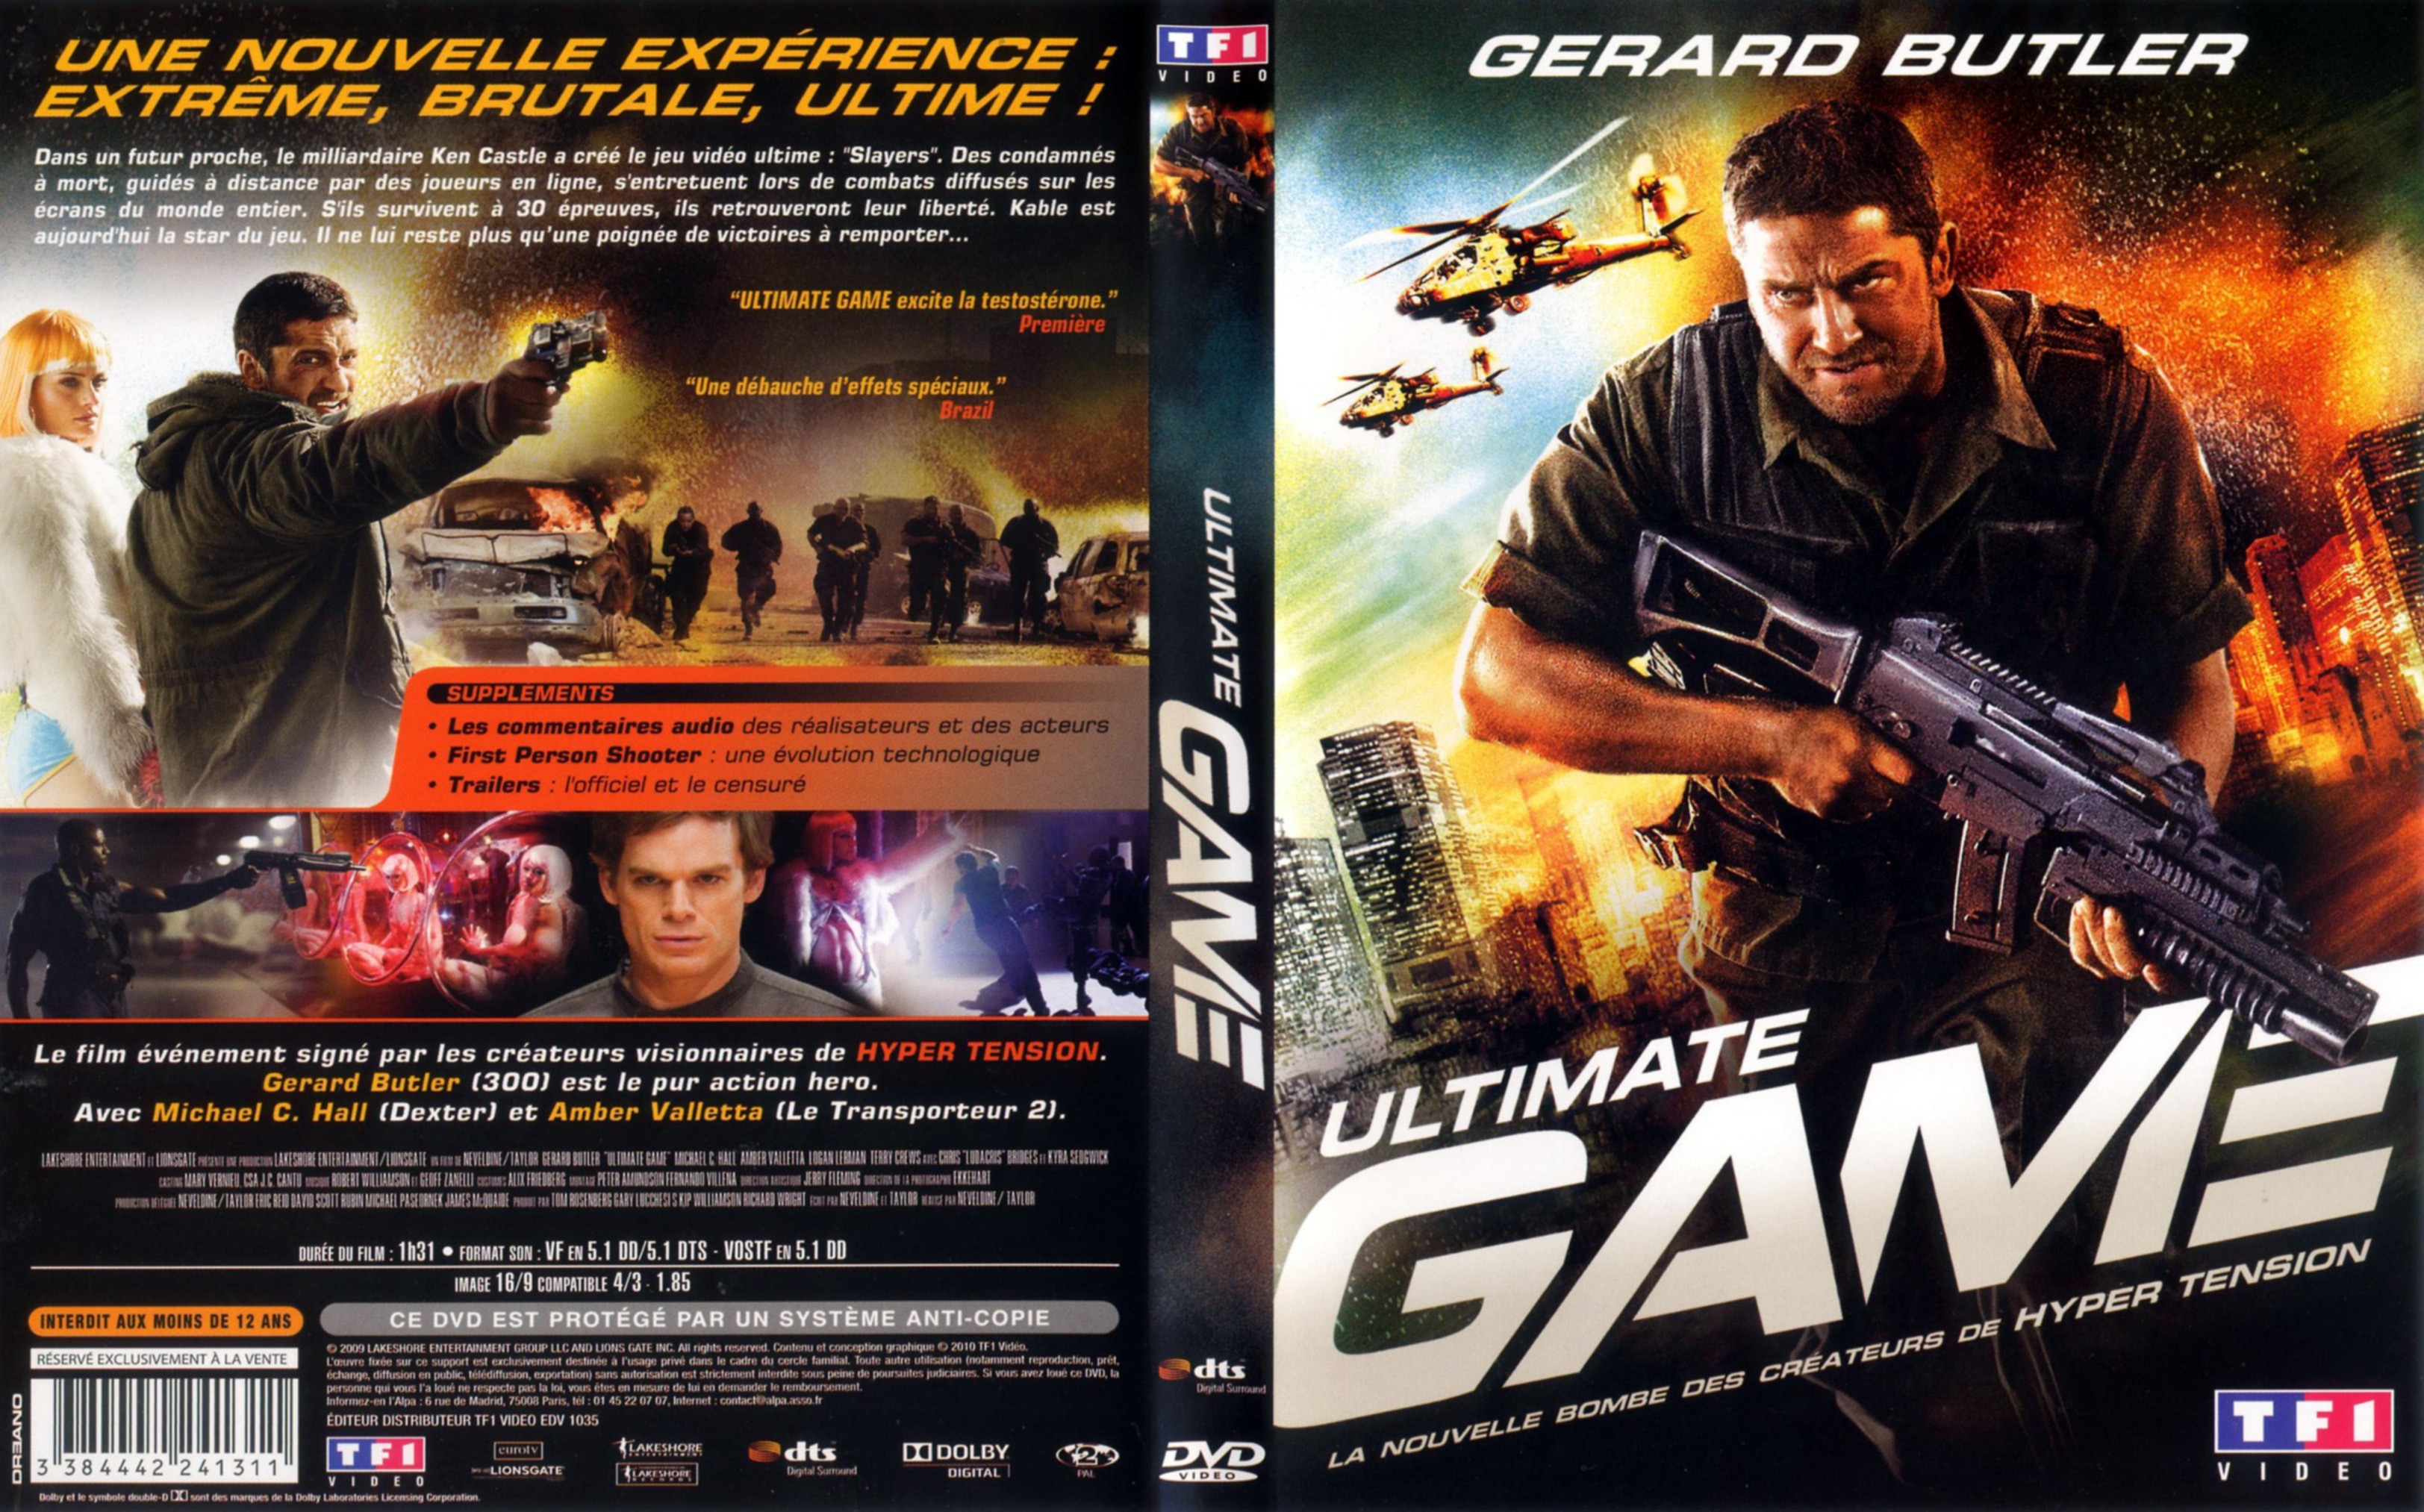 Jaquette DVD Ultimate game